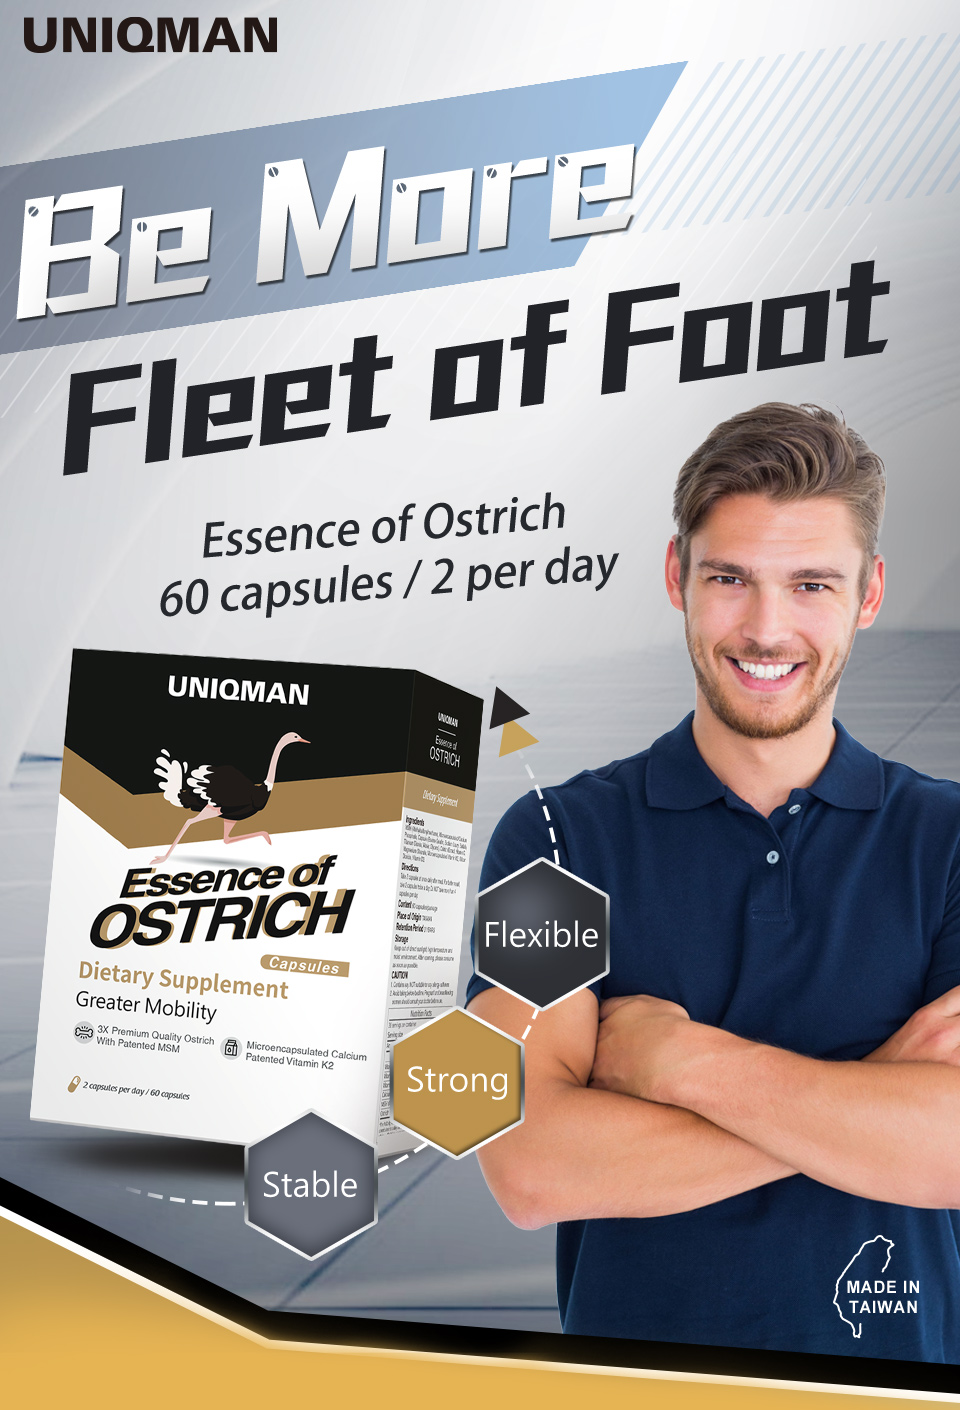 UNIQMAN Essence of Ostrich Capsules supports healthy bone,  joint structure, function and comfort.